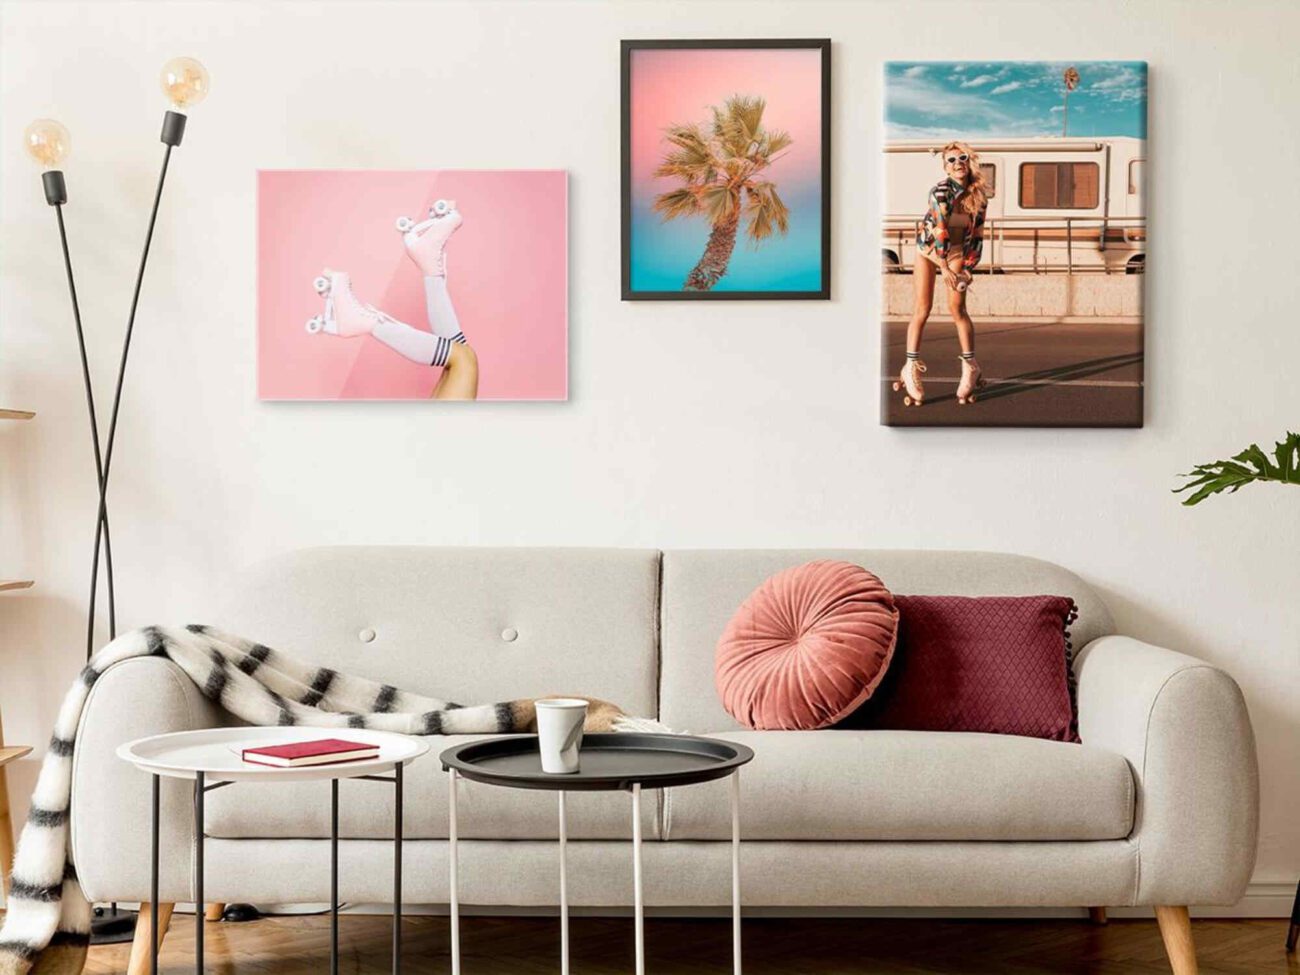 Stunning wall art can brighten up any room. Get ready to spend a little money when you learn about how to decorate your home and liven up your space!